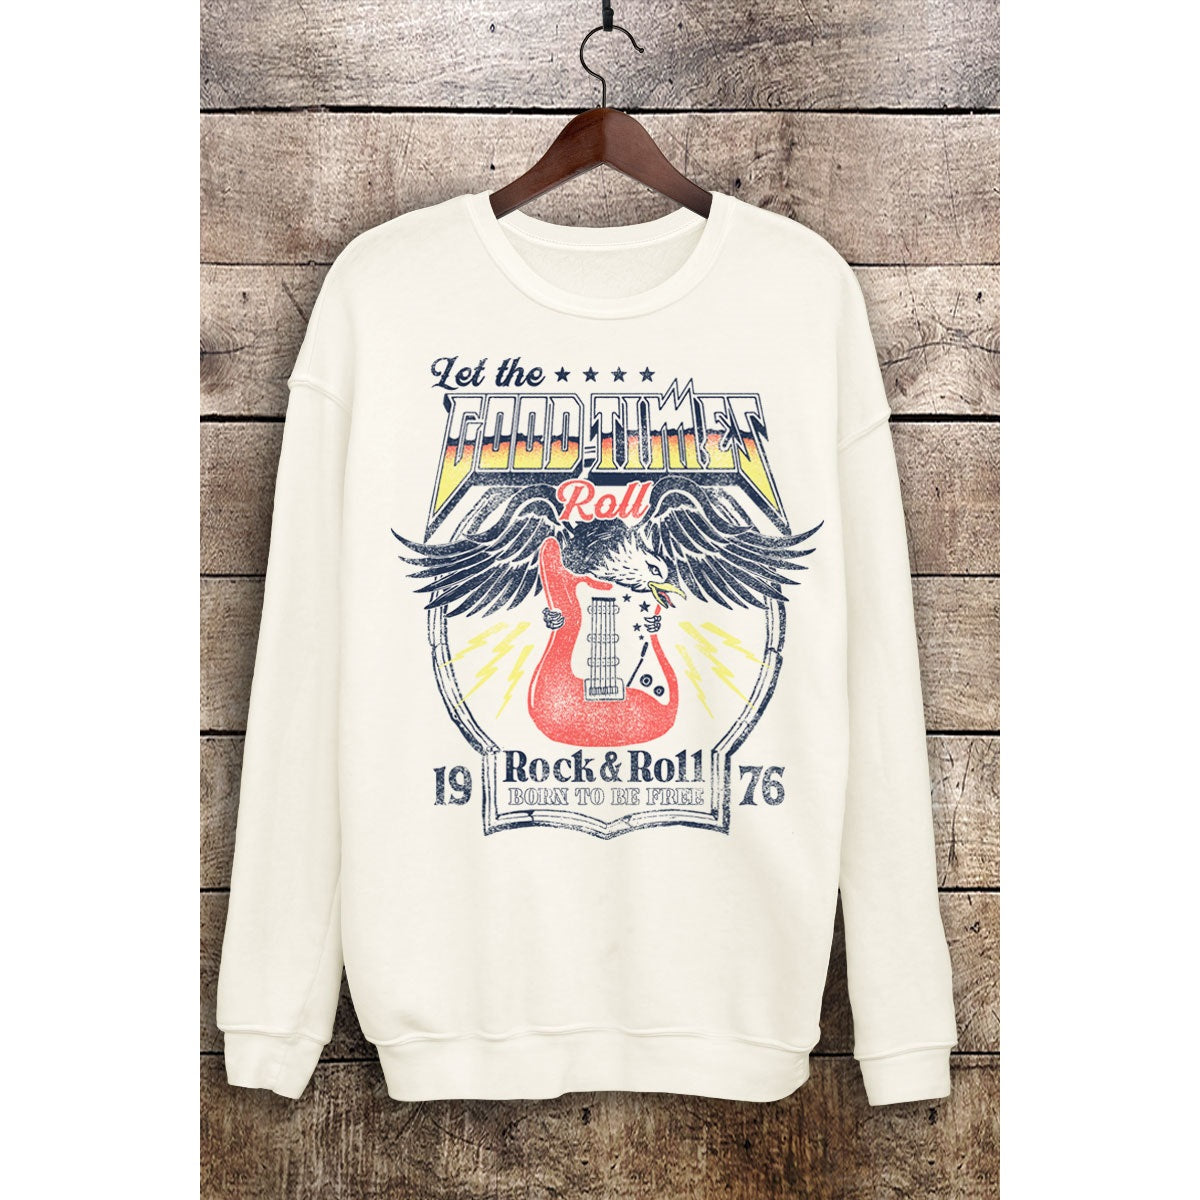 Let the Good Times Roll - Sweatshirt - KC Outfitter